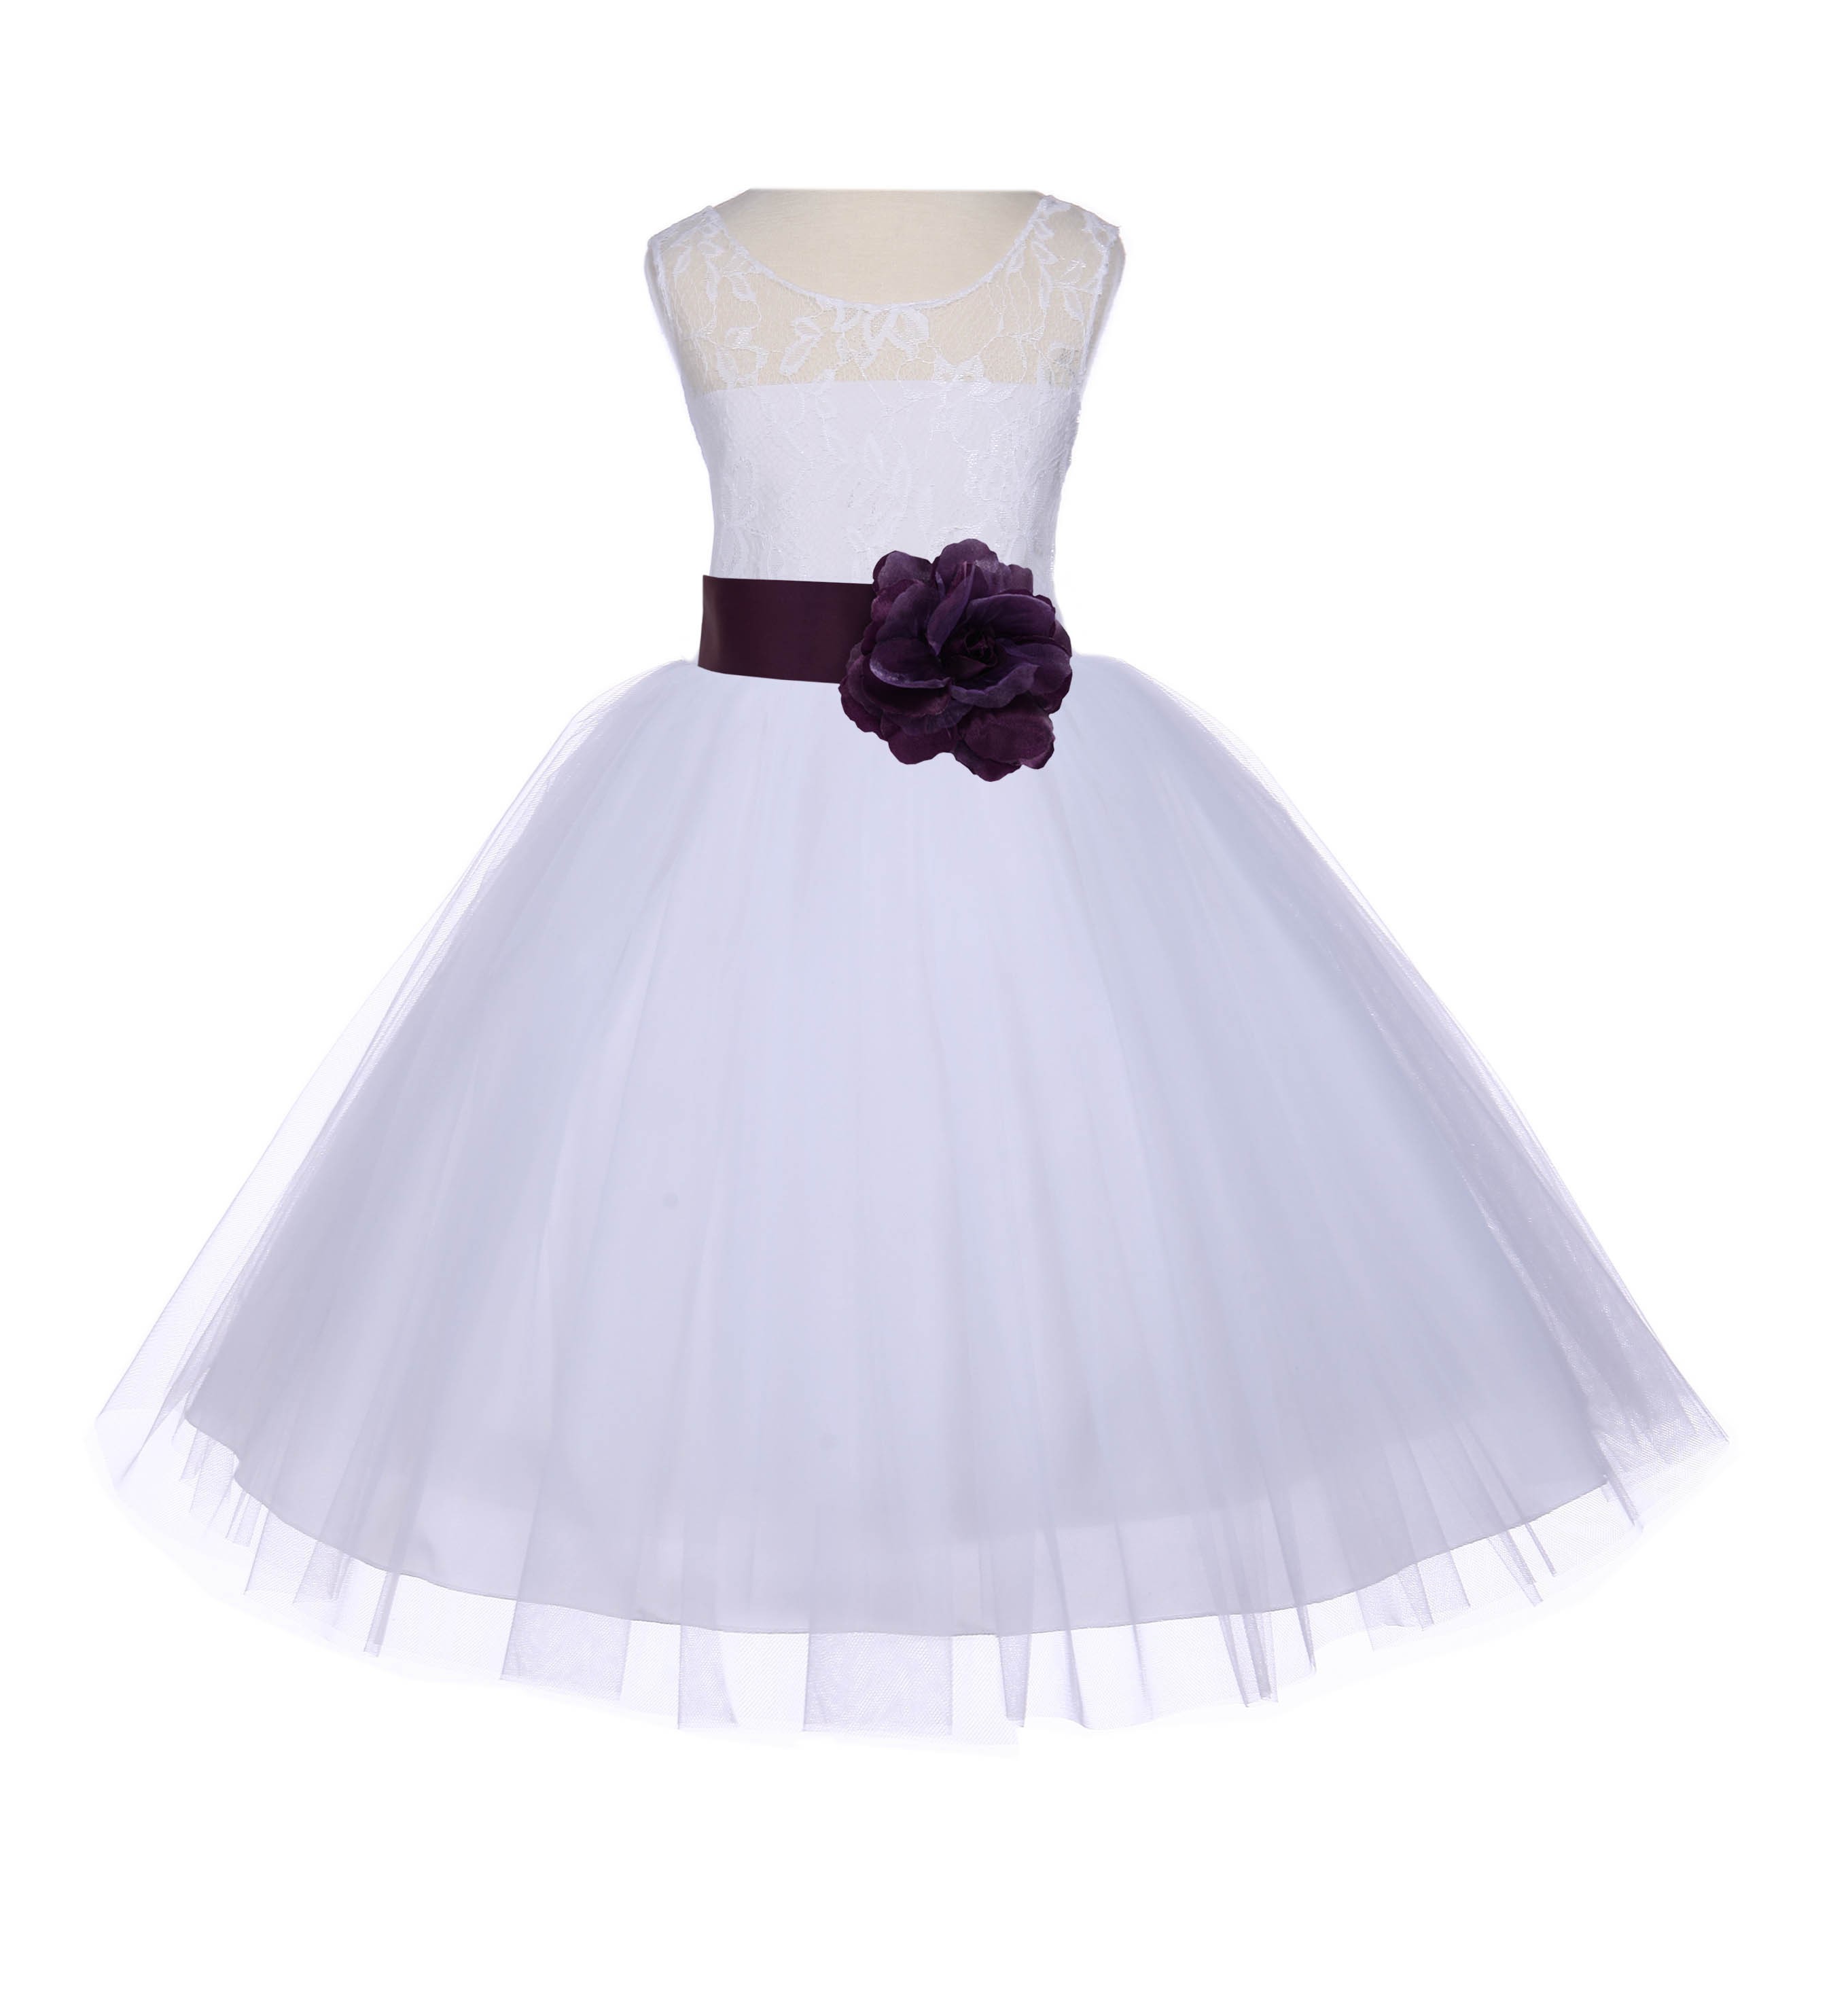 White/Plum Floral Lace Bodice Tulle Flower Girl Dress Wedding 153S